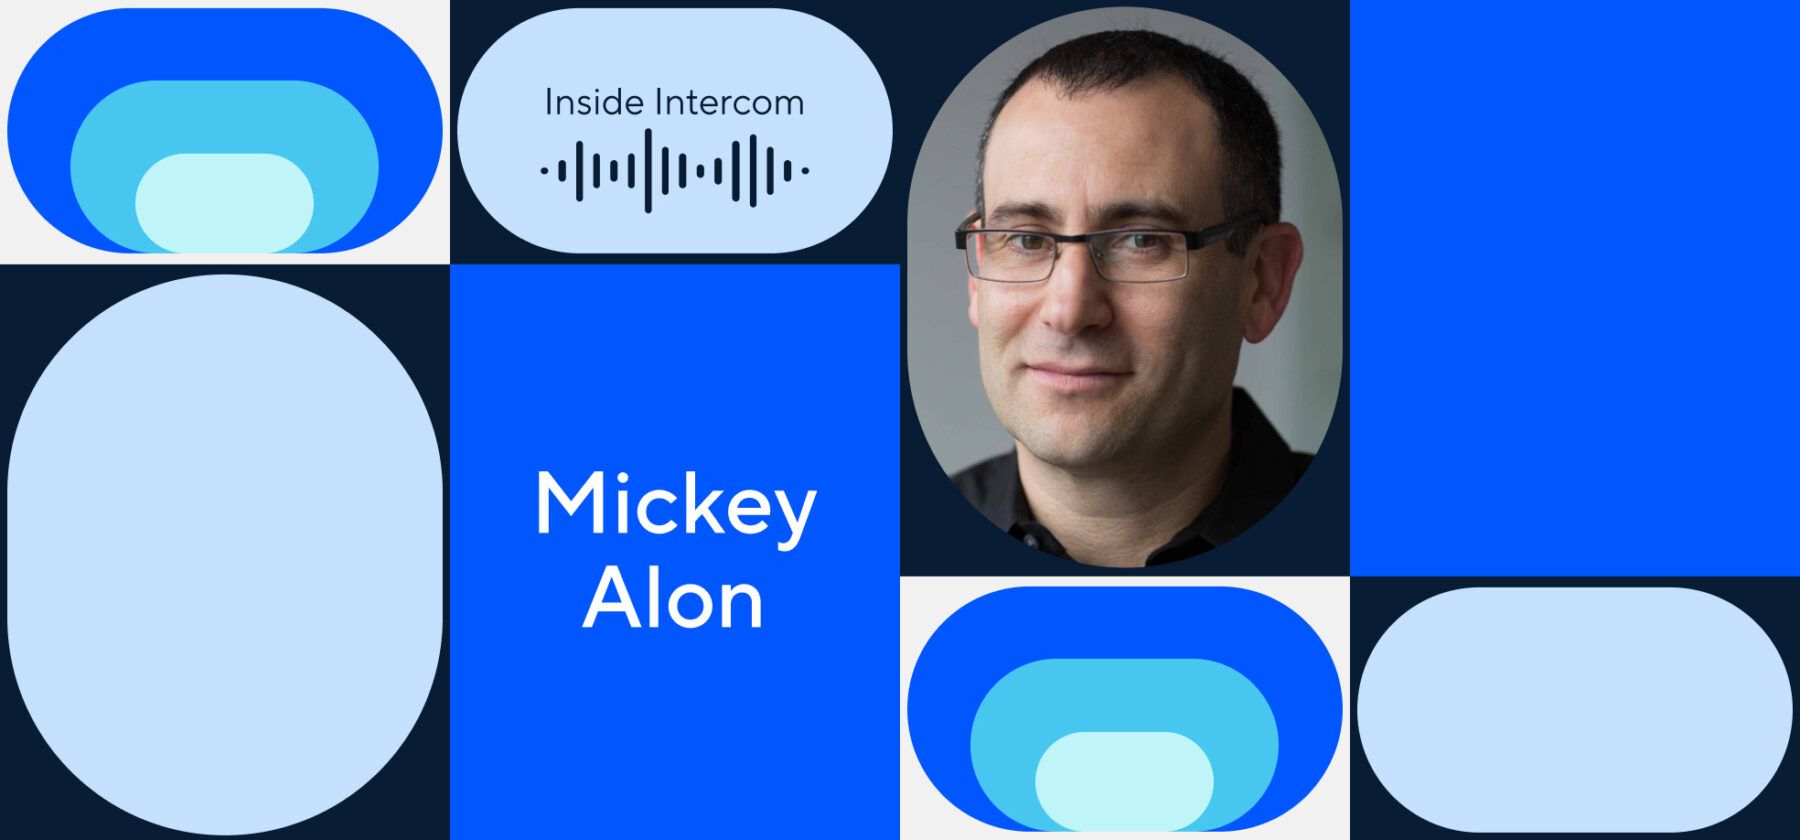 Gainsight PX founder Mickey Alon on using your product as a vehicle for growth